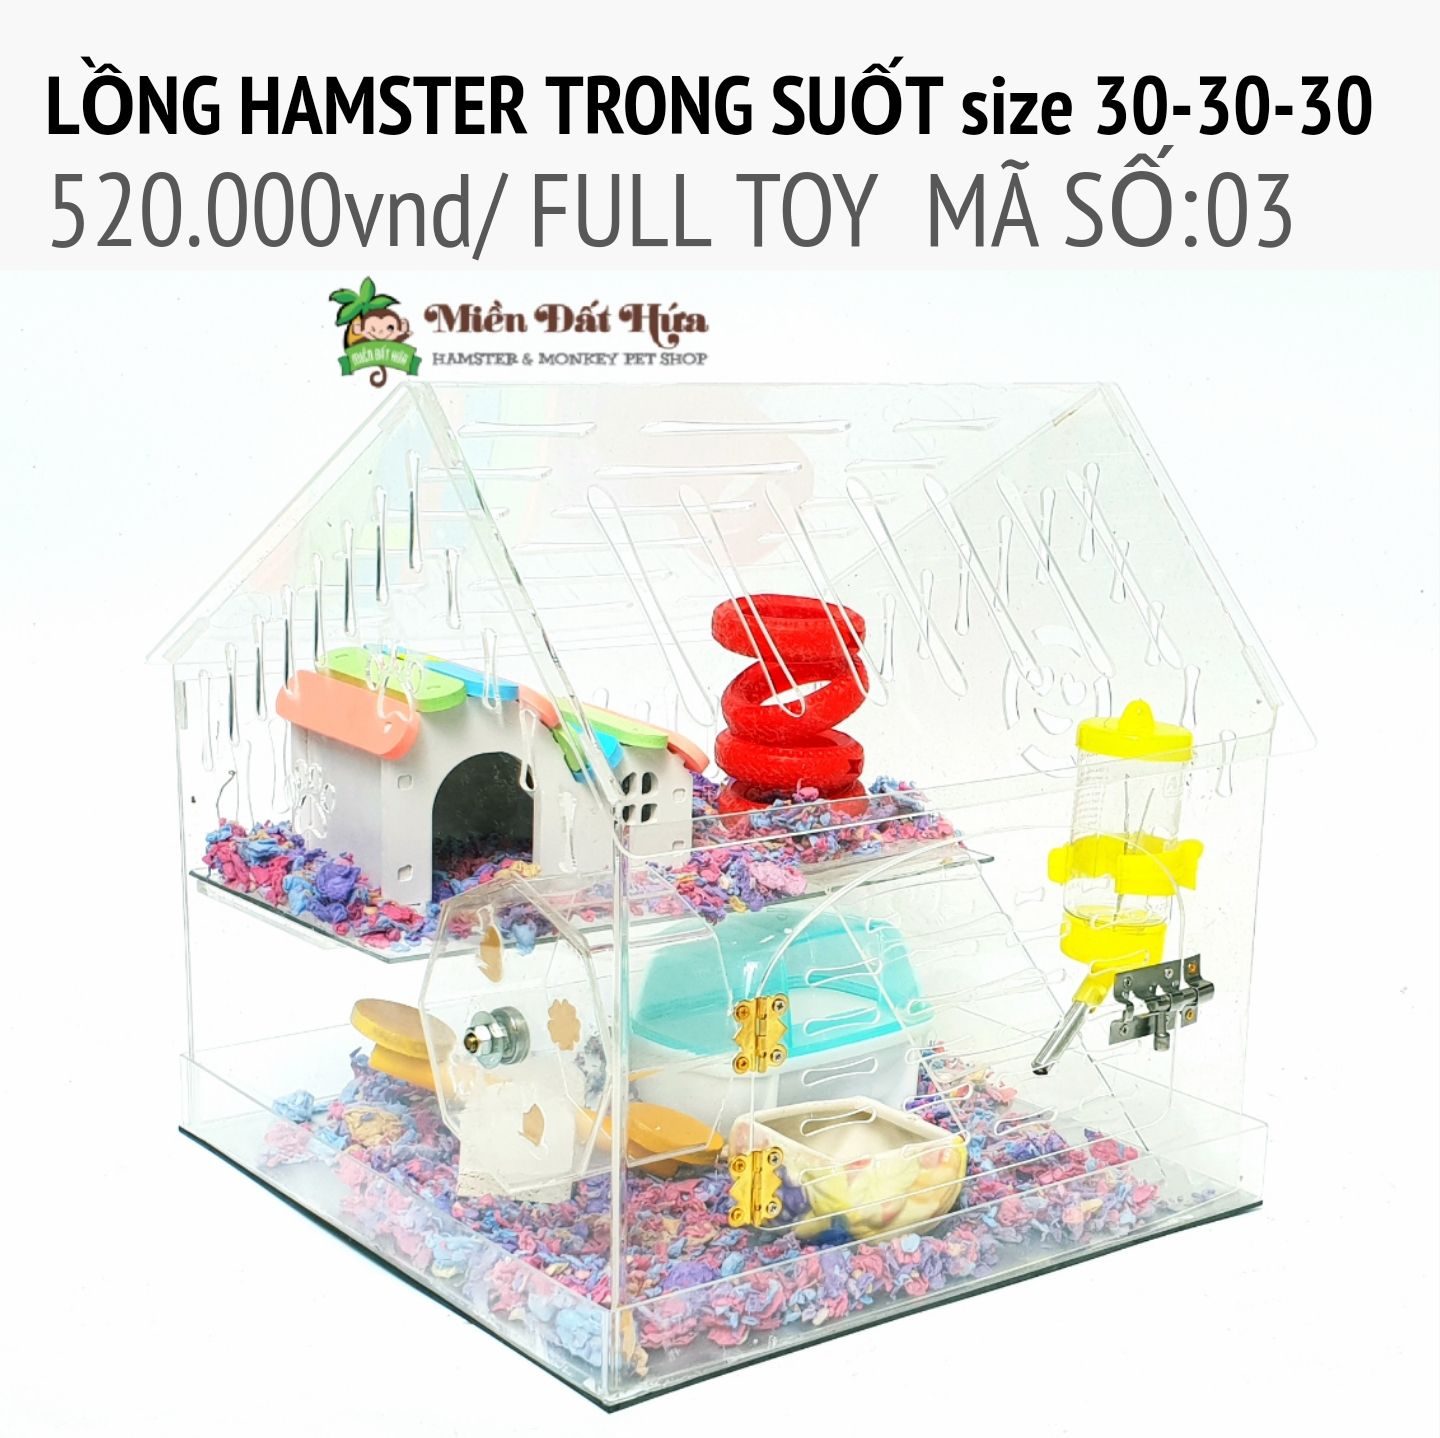 LỒNG hamster trong suốt size 30-30-30 ms03